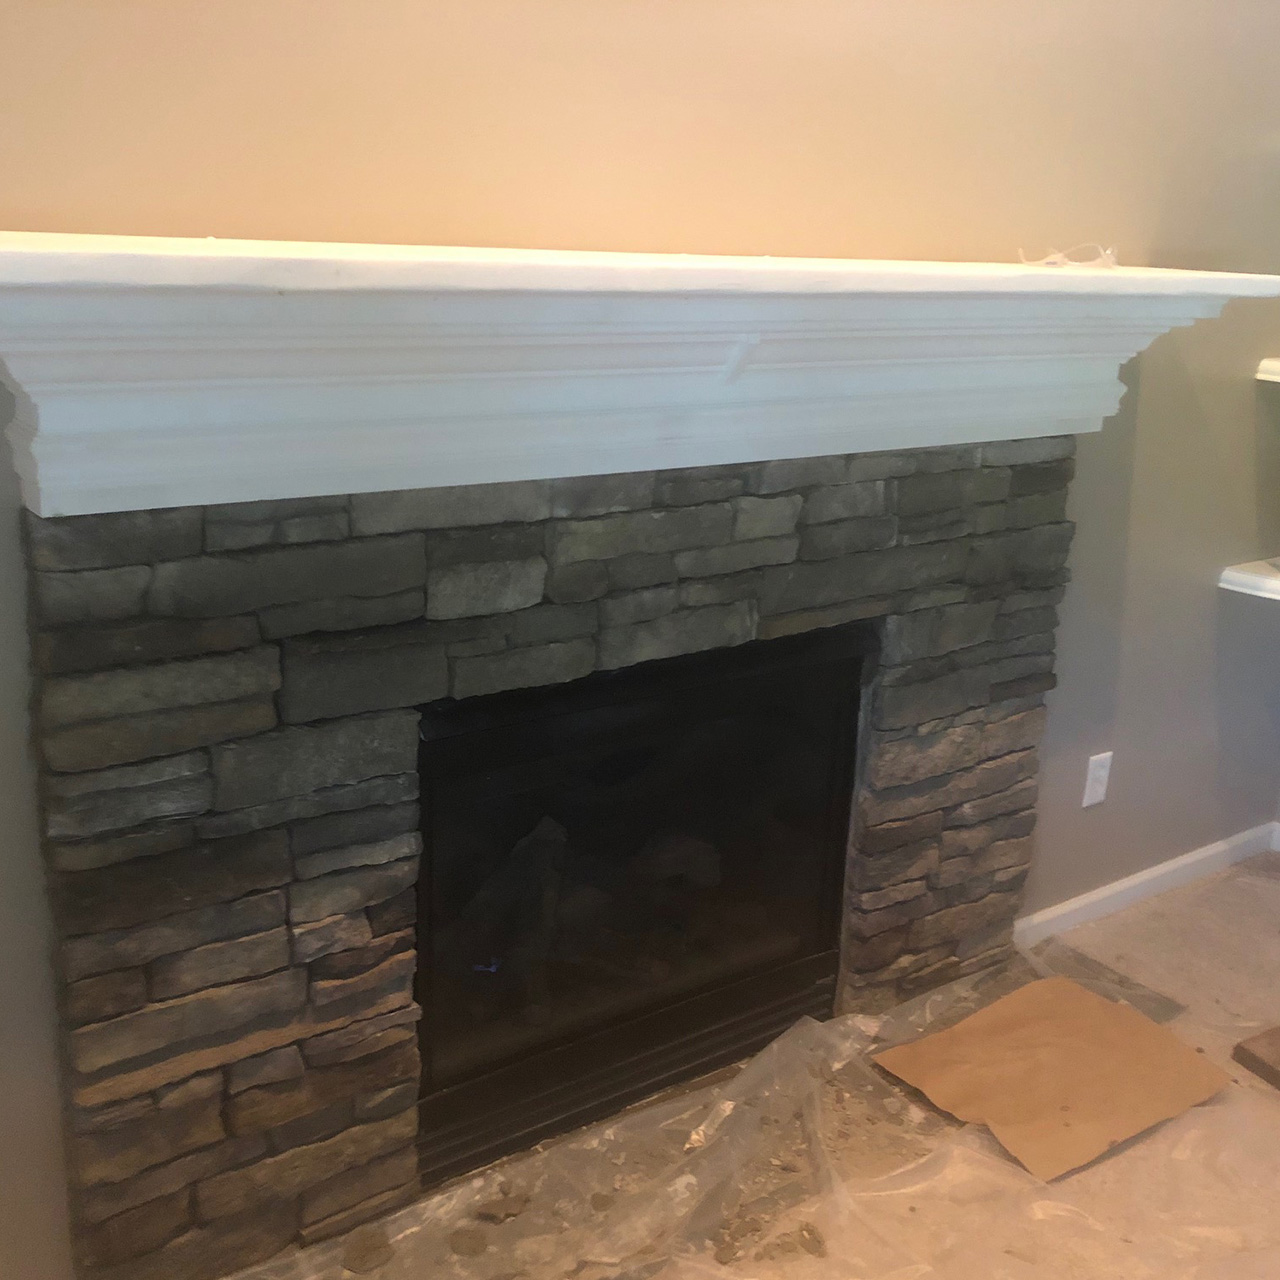 calandra fireplace with a mantle